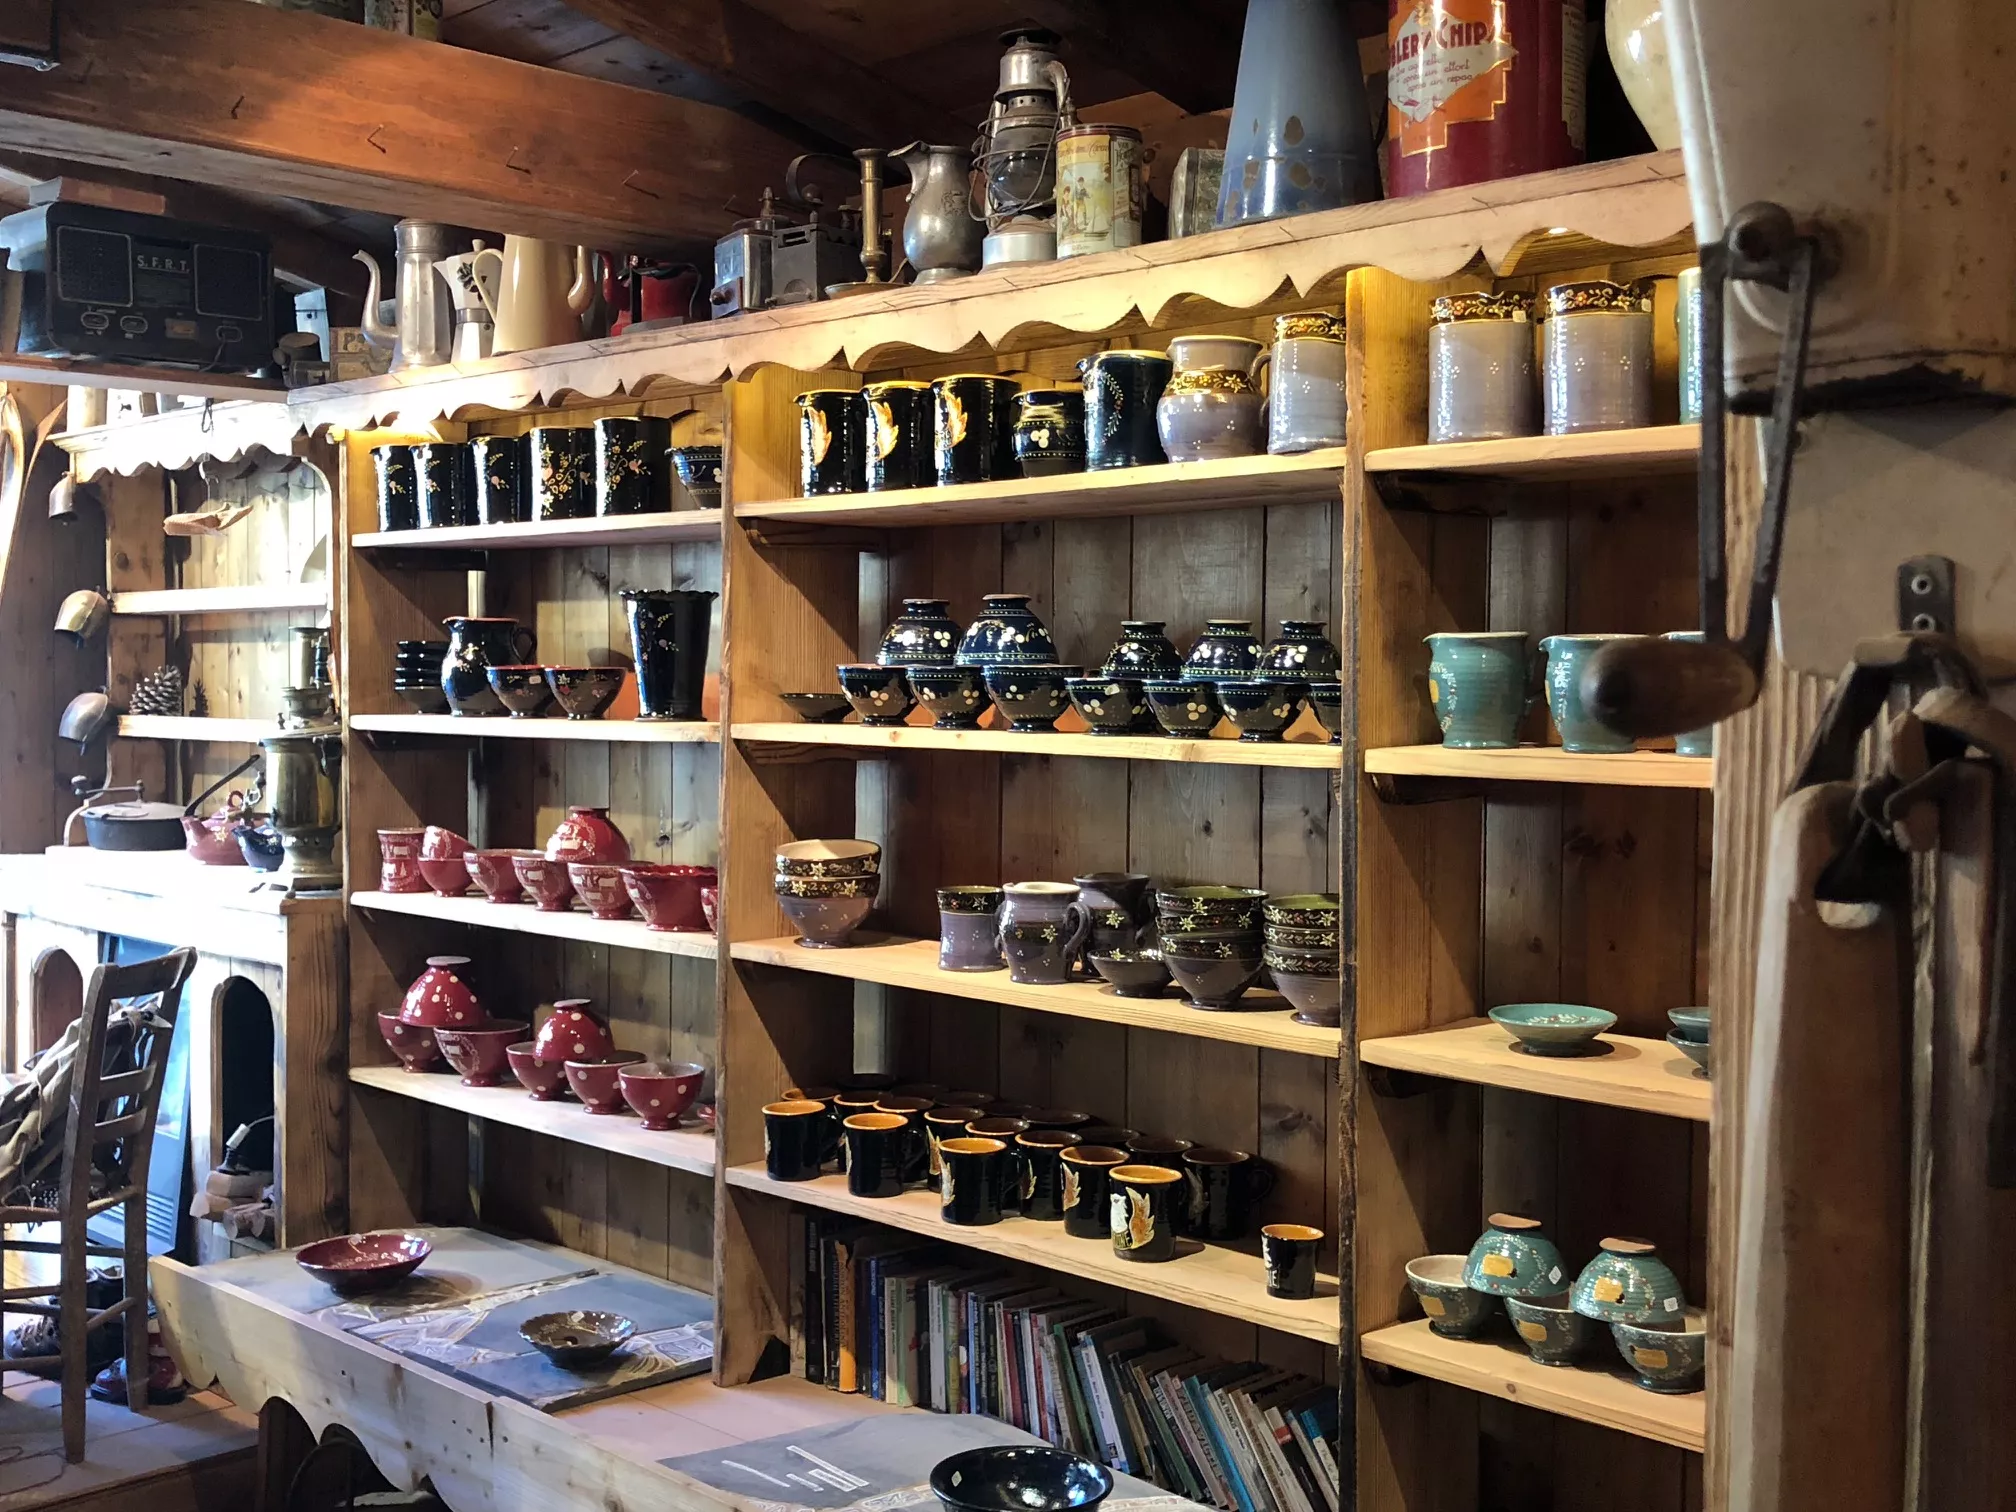 Poterie de Morzine in France, europe | Souvenirs,Gifts - Rated 5